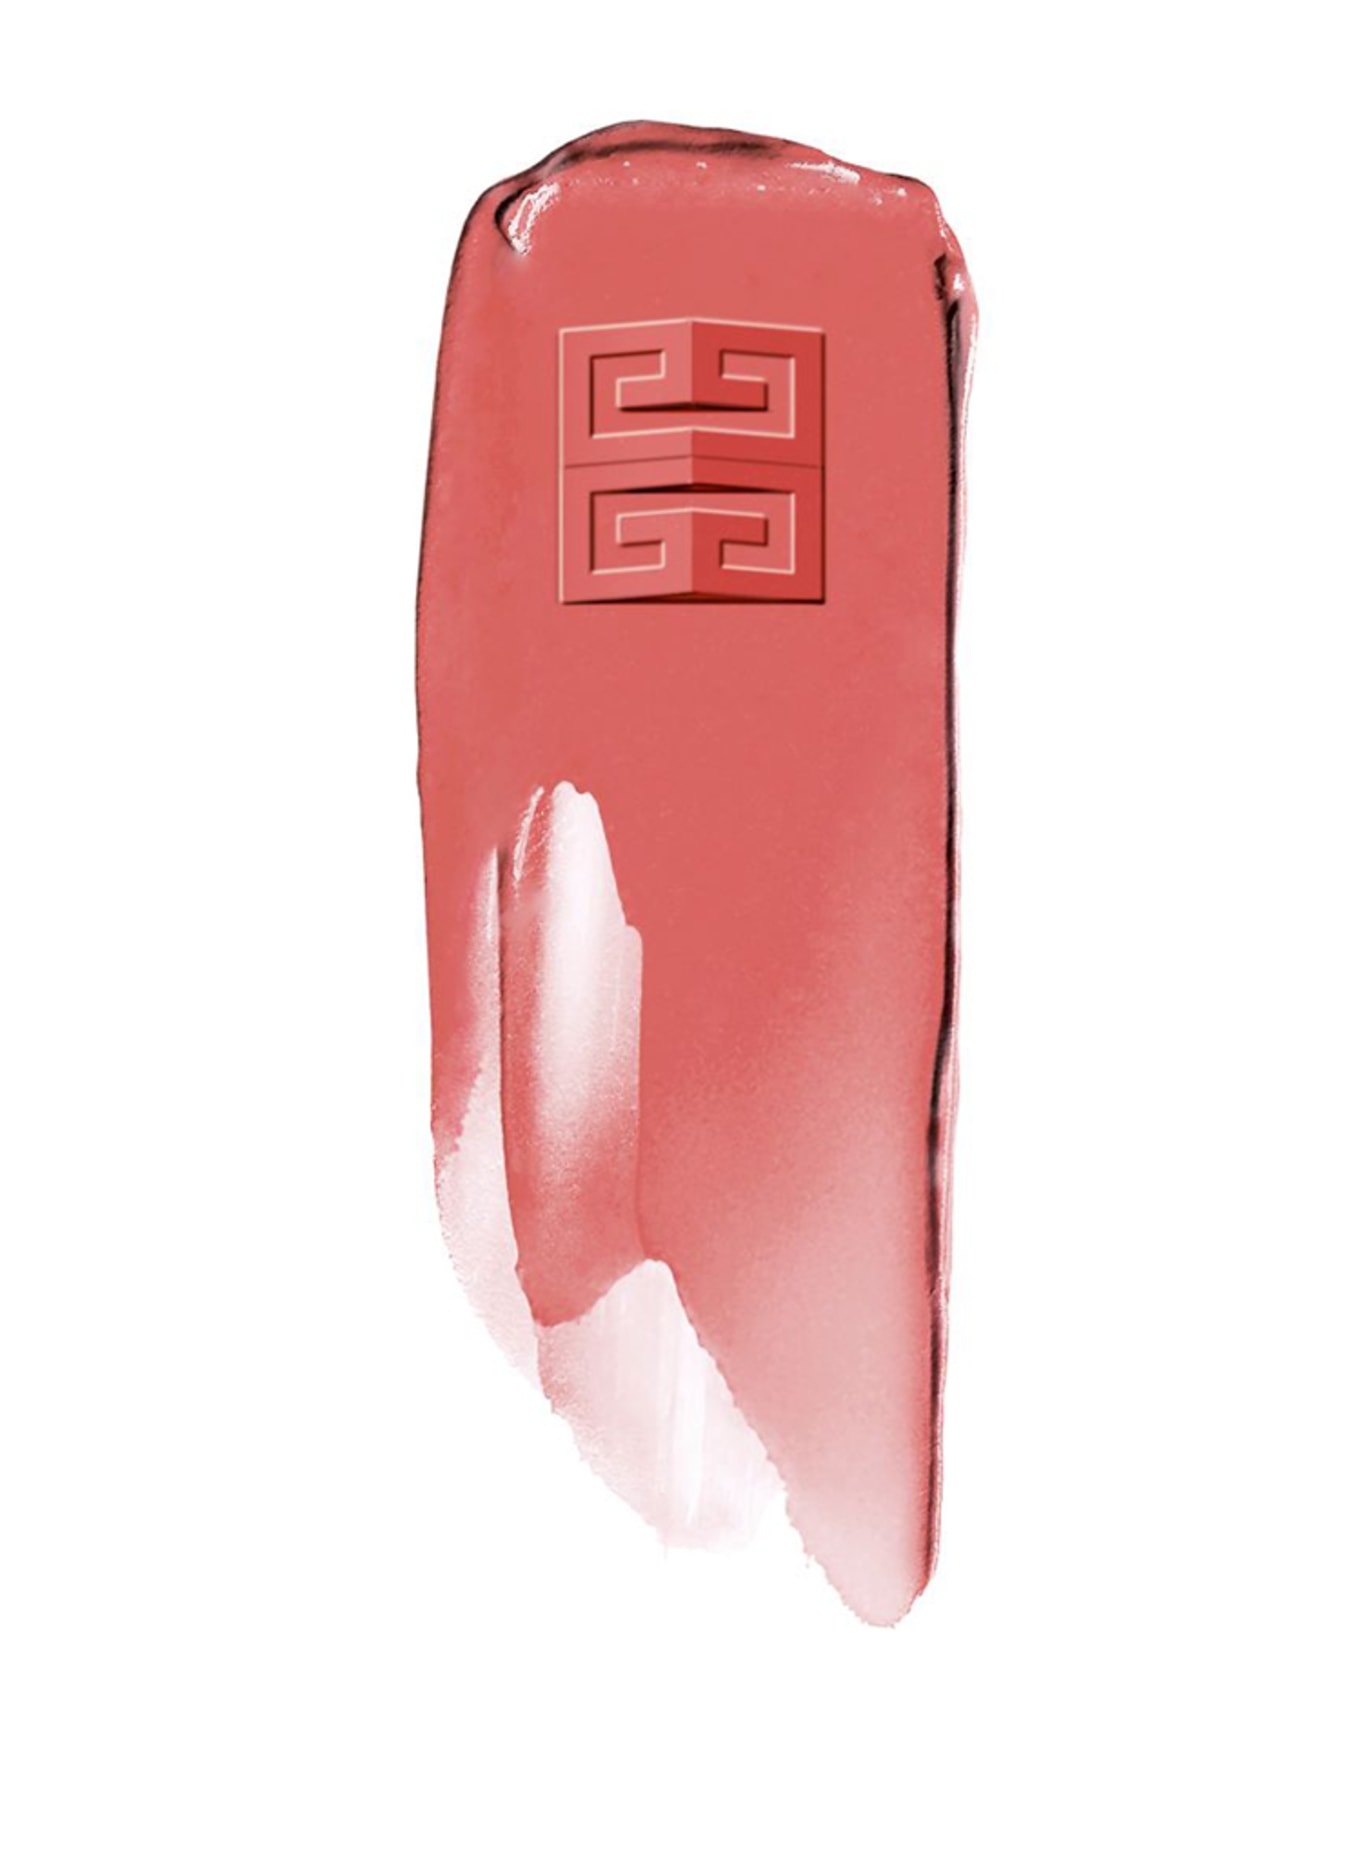 GIVENCHY BEAUTY LE ROUGE INTERDIT INTENSE SILK, Farbe: N112 NUDE MOUSSELINE (Bild 2)